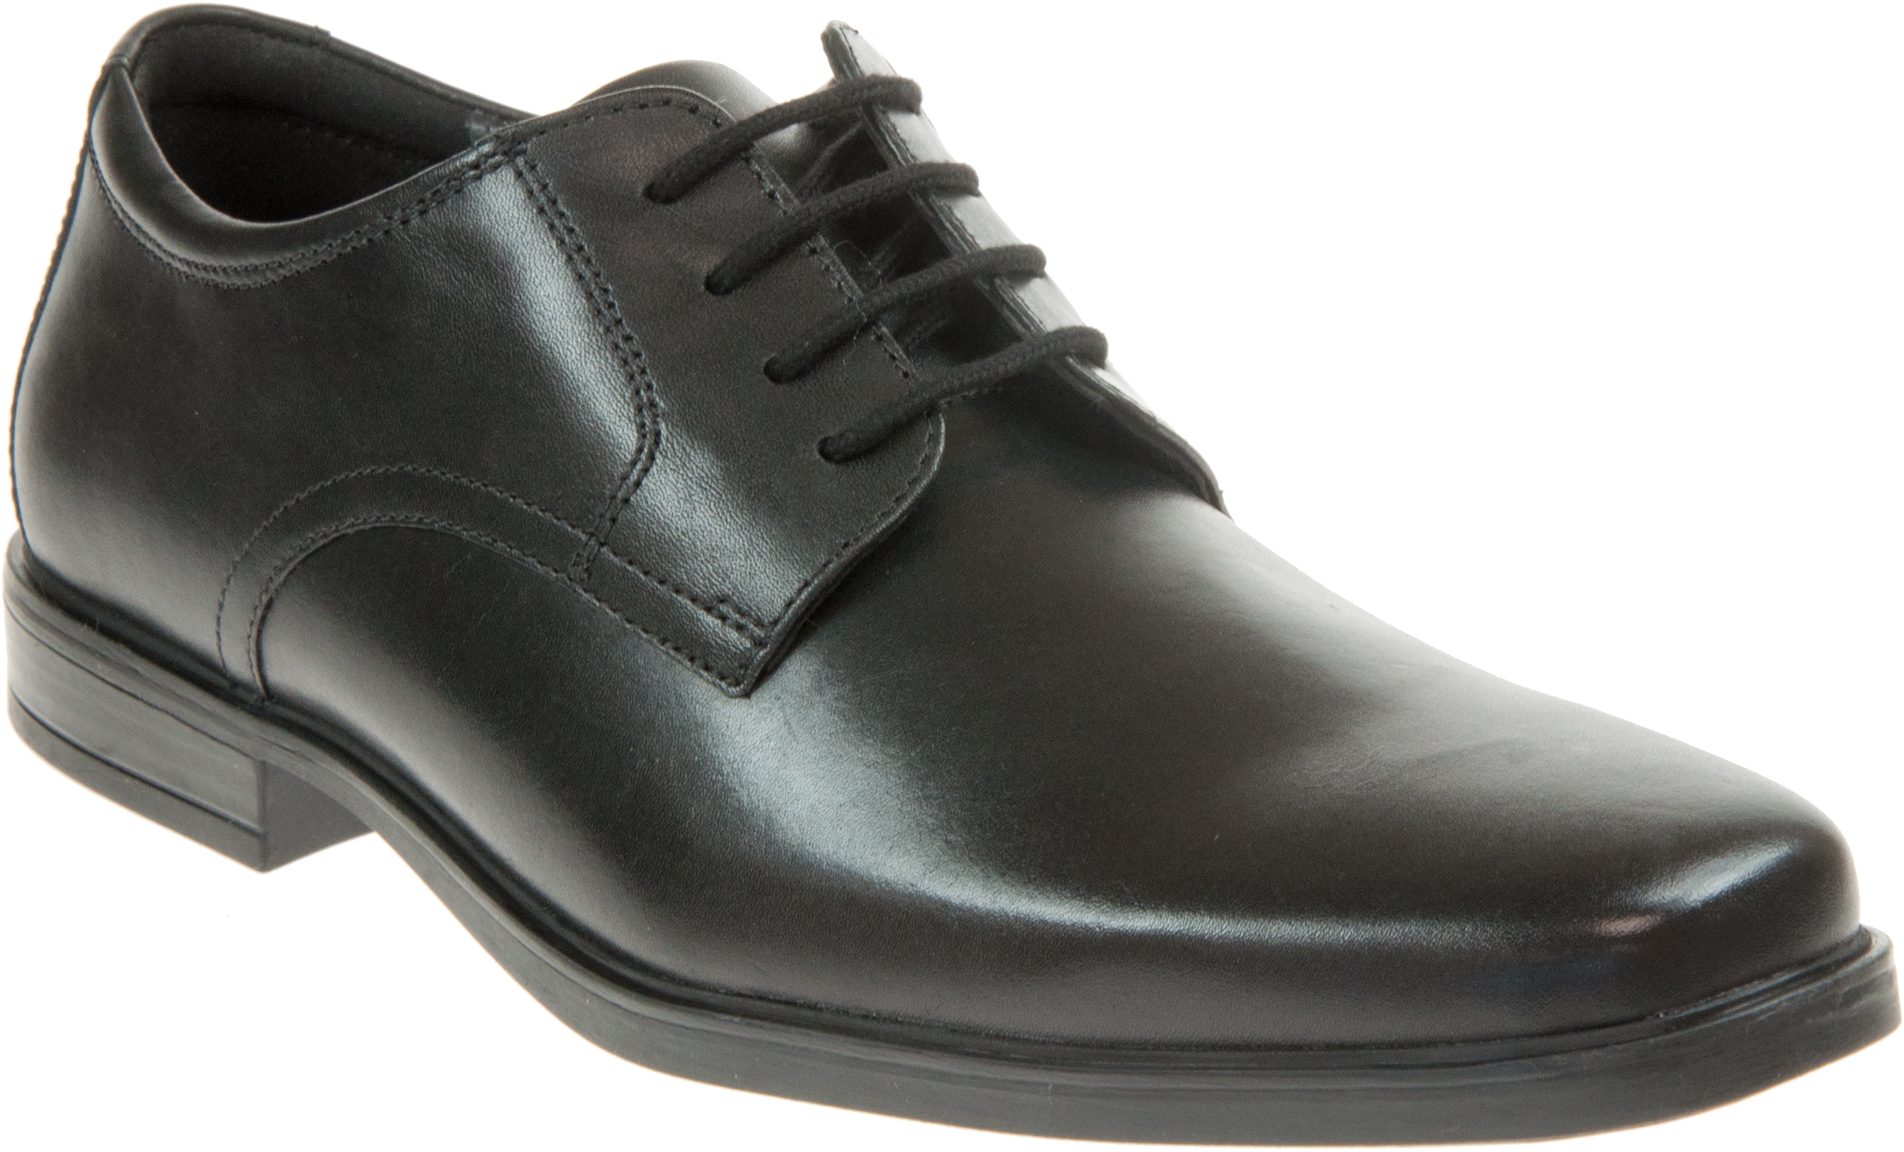 Clarks Howard Walk Black Leather 26161285 - Formal Shoes - Humphries Shoes